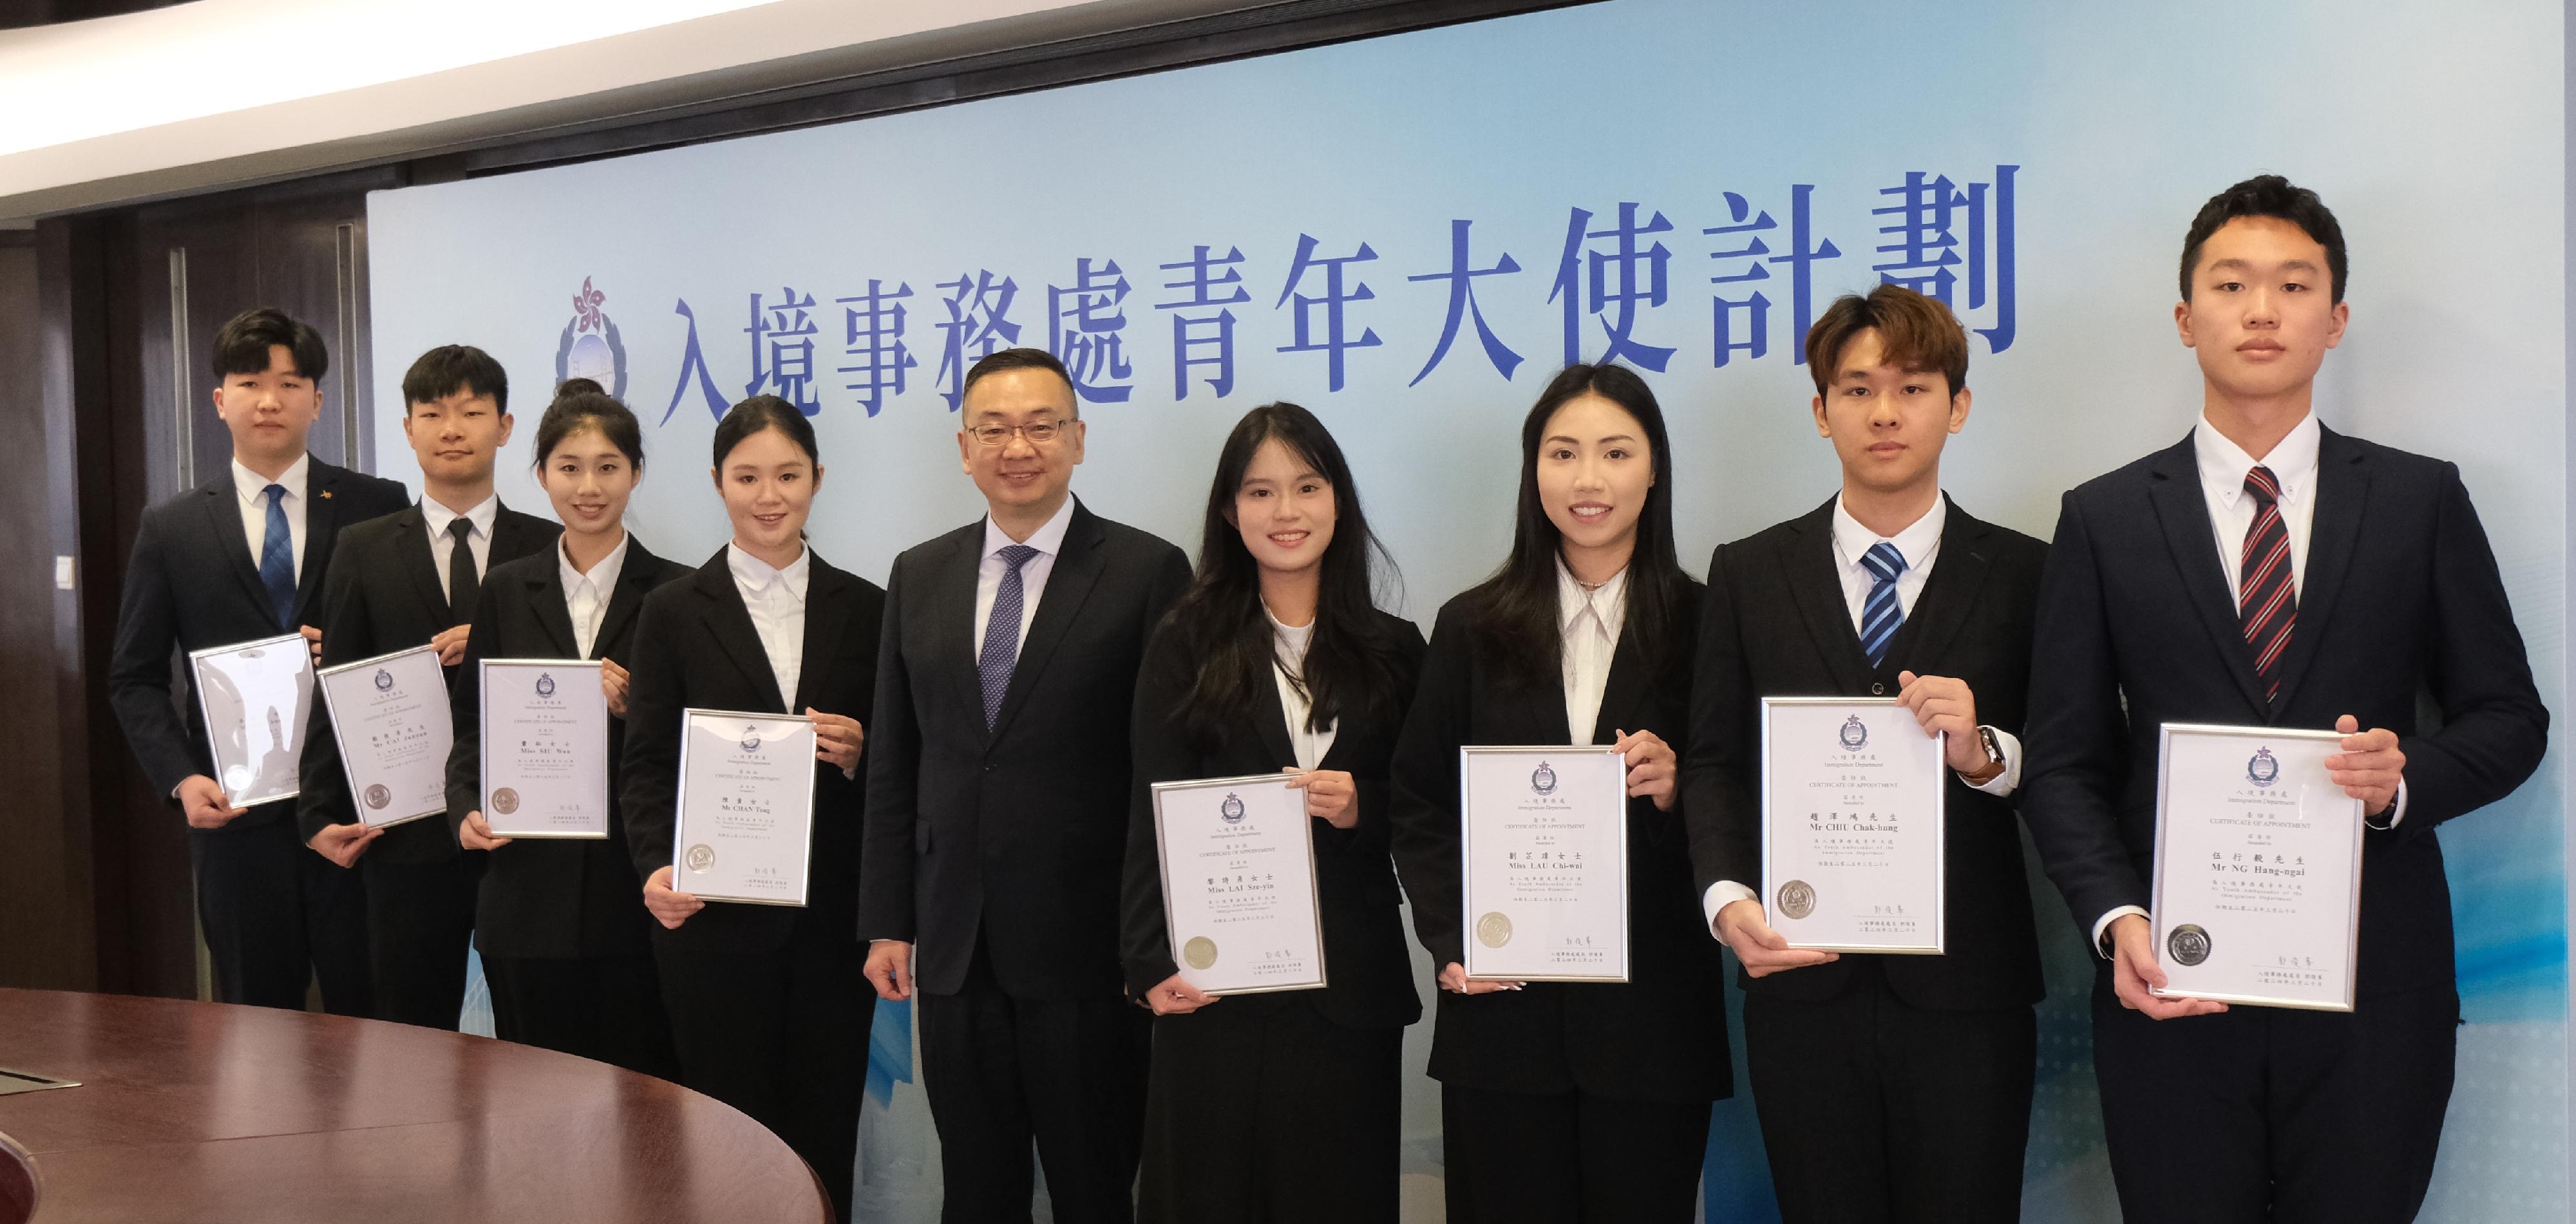 The Director of the Immigration, Mr Benson Kwok, attended the appointment ceremony of the Immigration Department Youth Ambassador Programme in Guangzhou. Photo shows Mr Kwok (fifth left) with eight Youth Ambassadors at the ceremony.